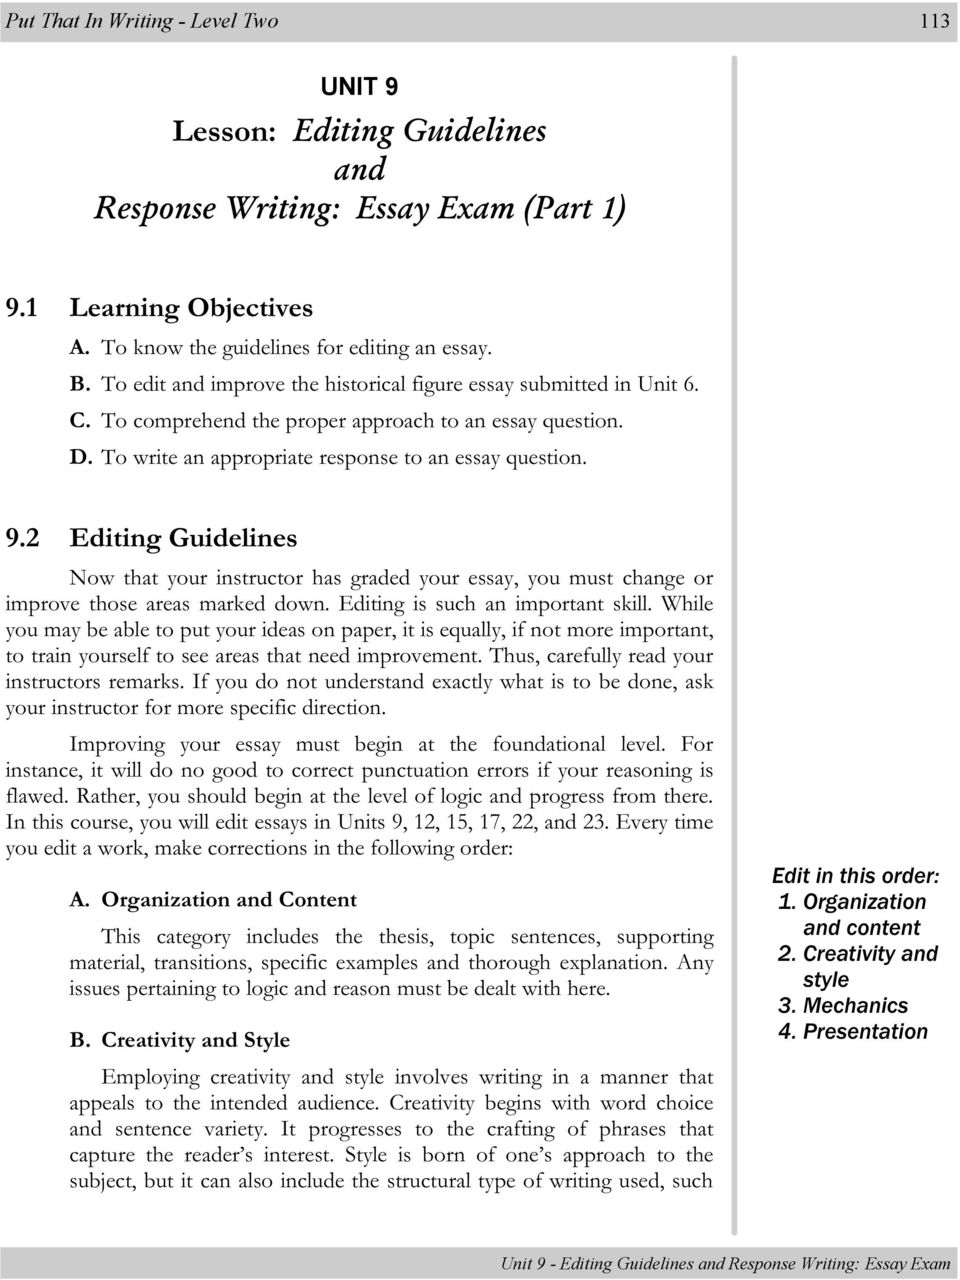 2 Editing Guidelines Now that your instructor has graded your essay, you must change or improve those areas marked down. Editing is such an important skill.